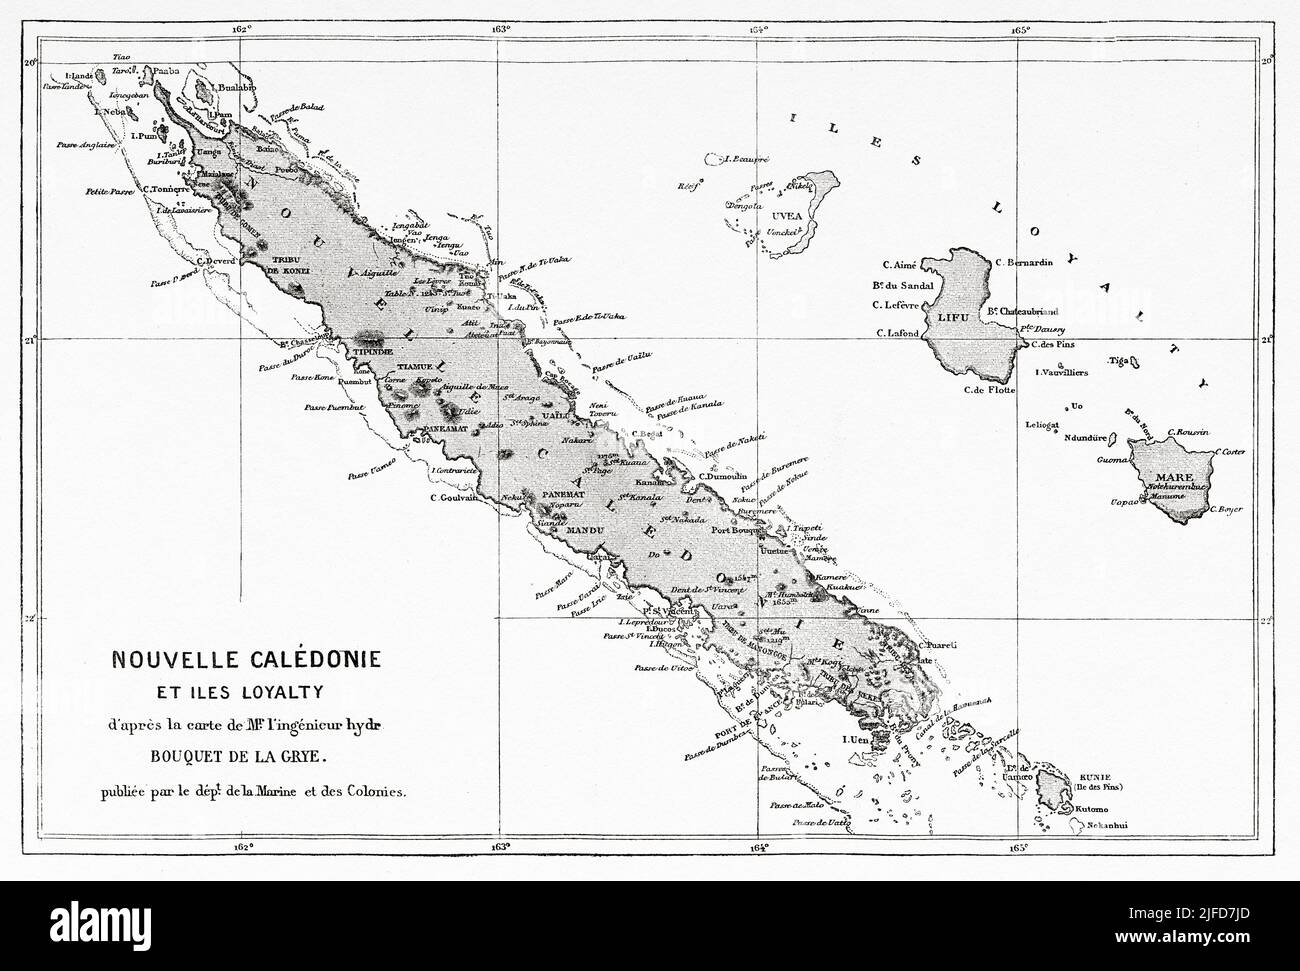 Old map of New Caledonia and Loyalty Island, New Caledonia. Journey to New Caledonia by Jules Garnier 1863-1866 from Le Tour du Monde 1867 Stock Photo